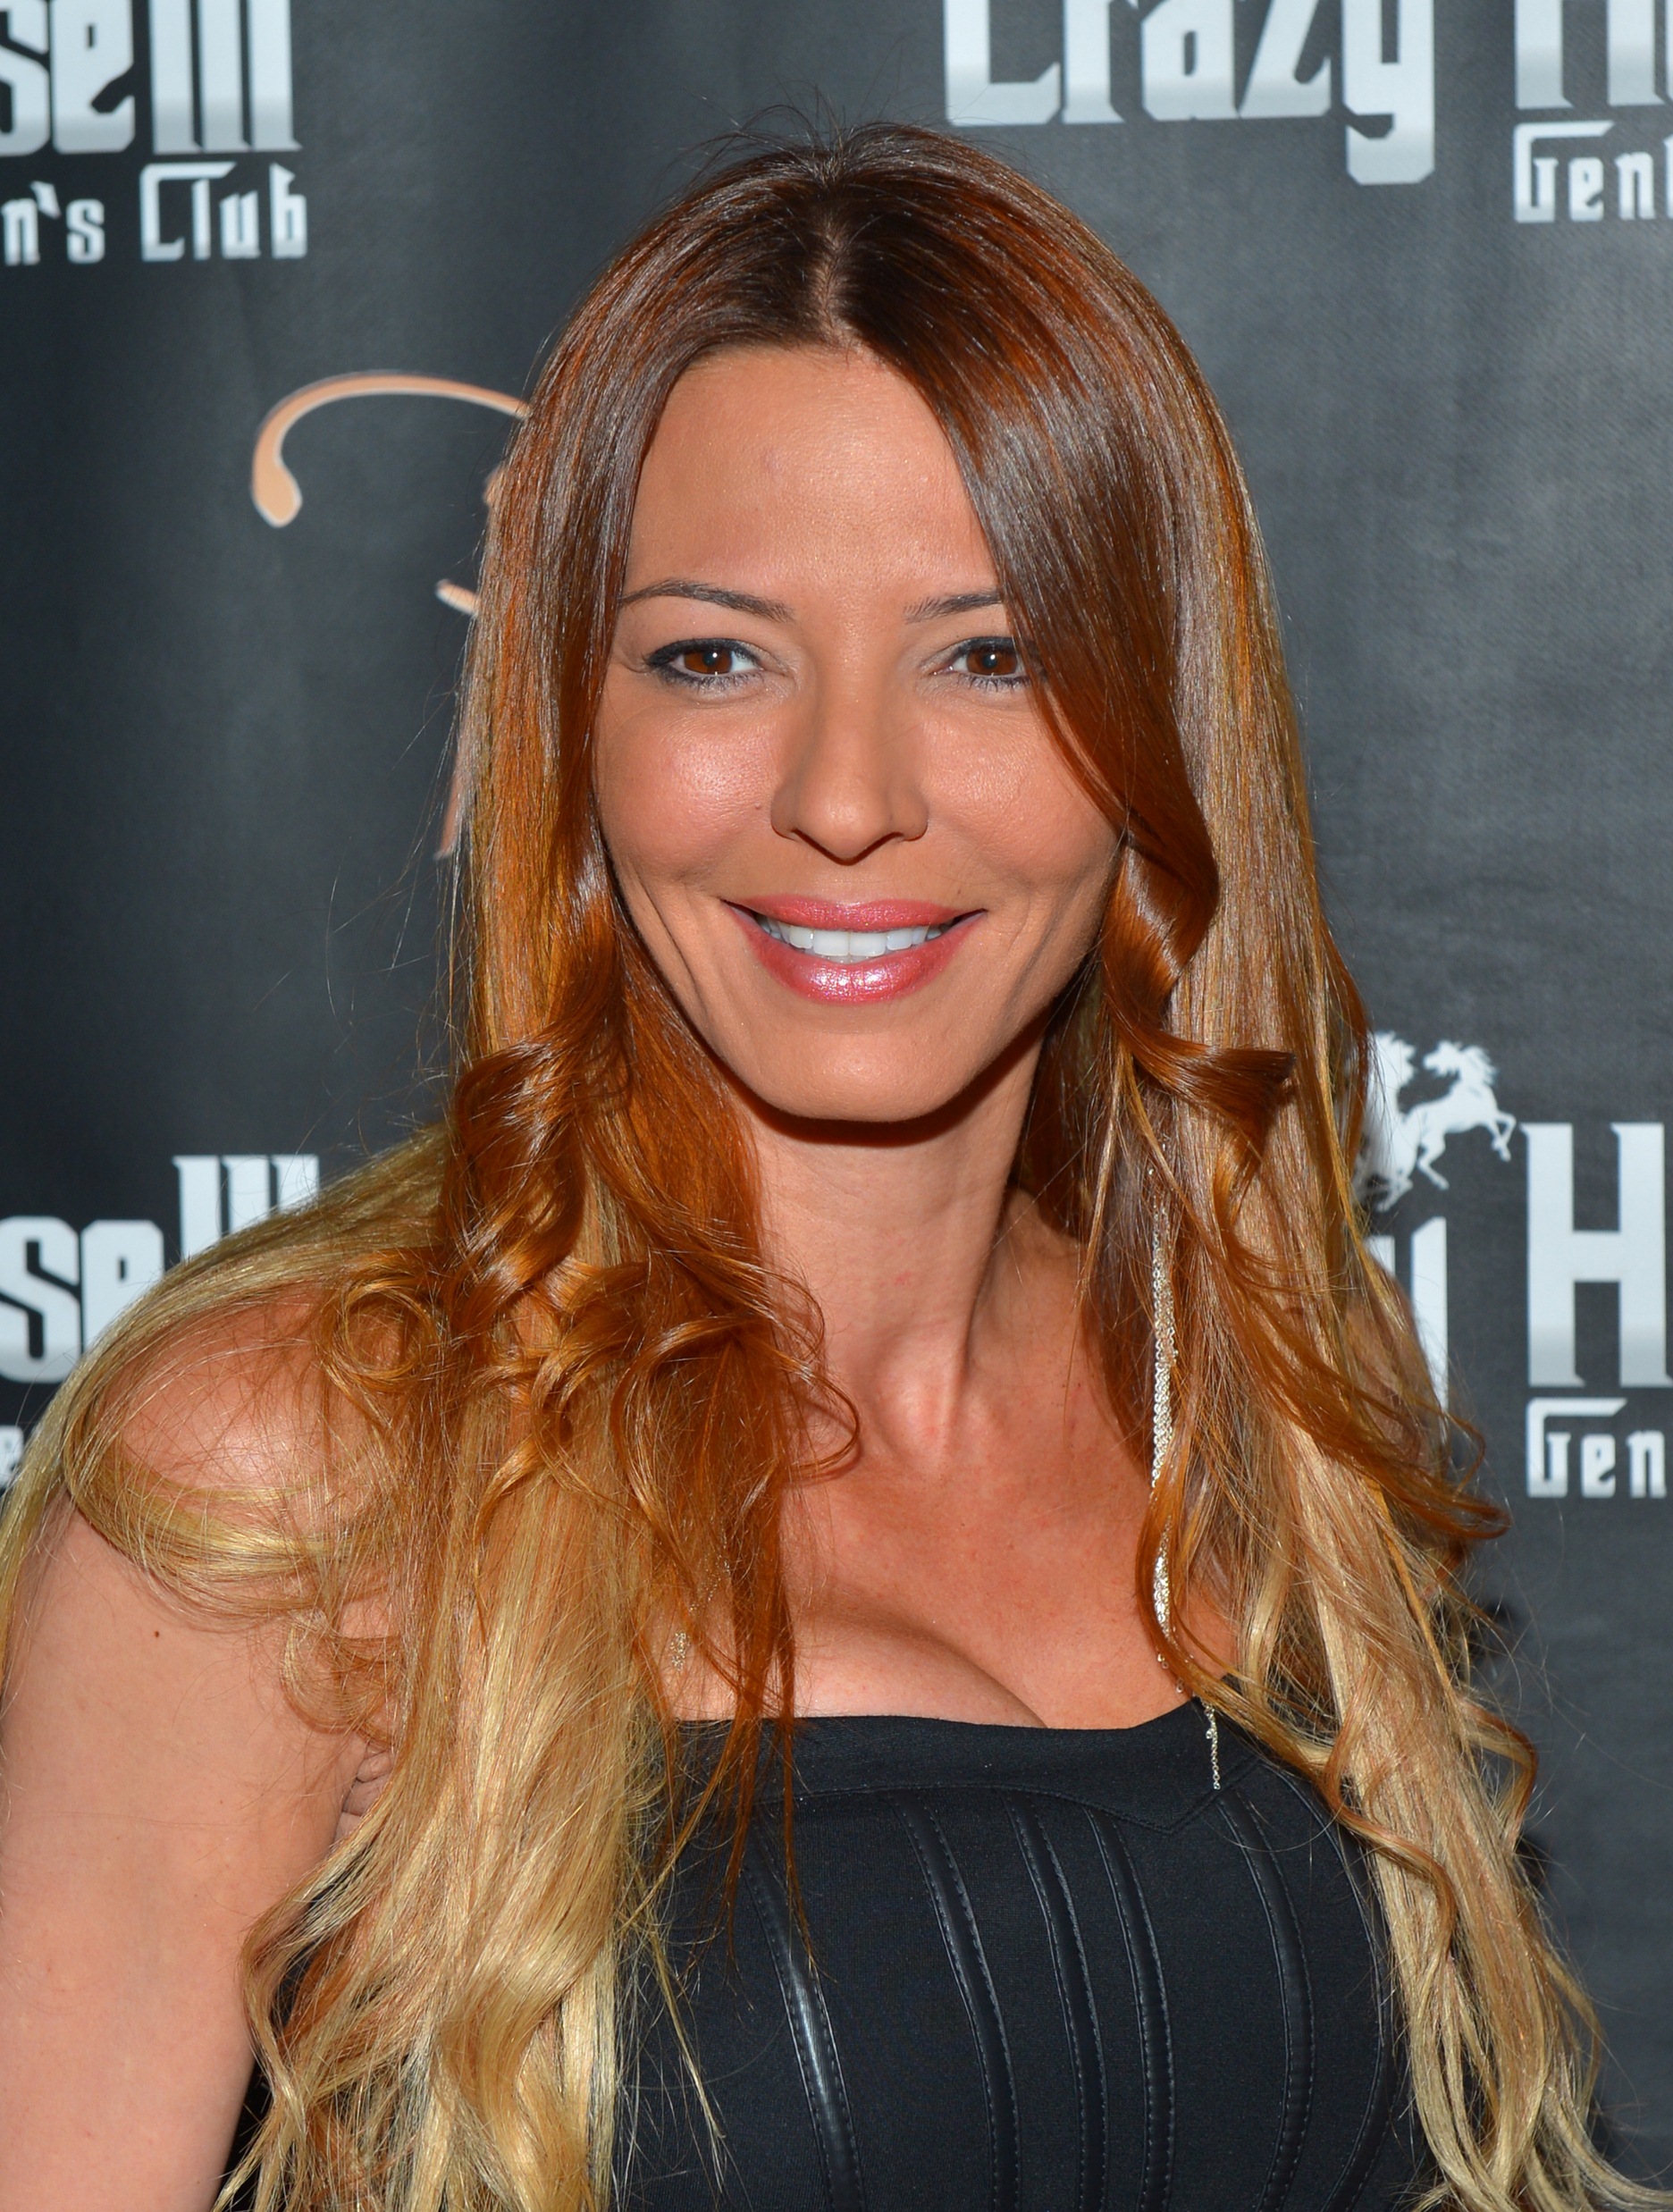 Drita Davanzo Quotes About Haters.